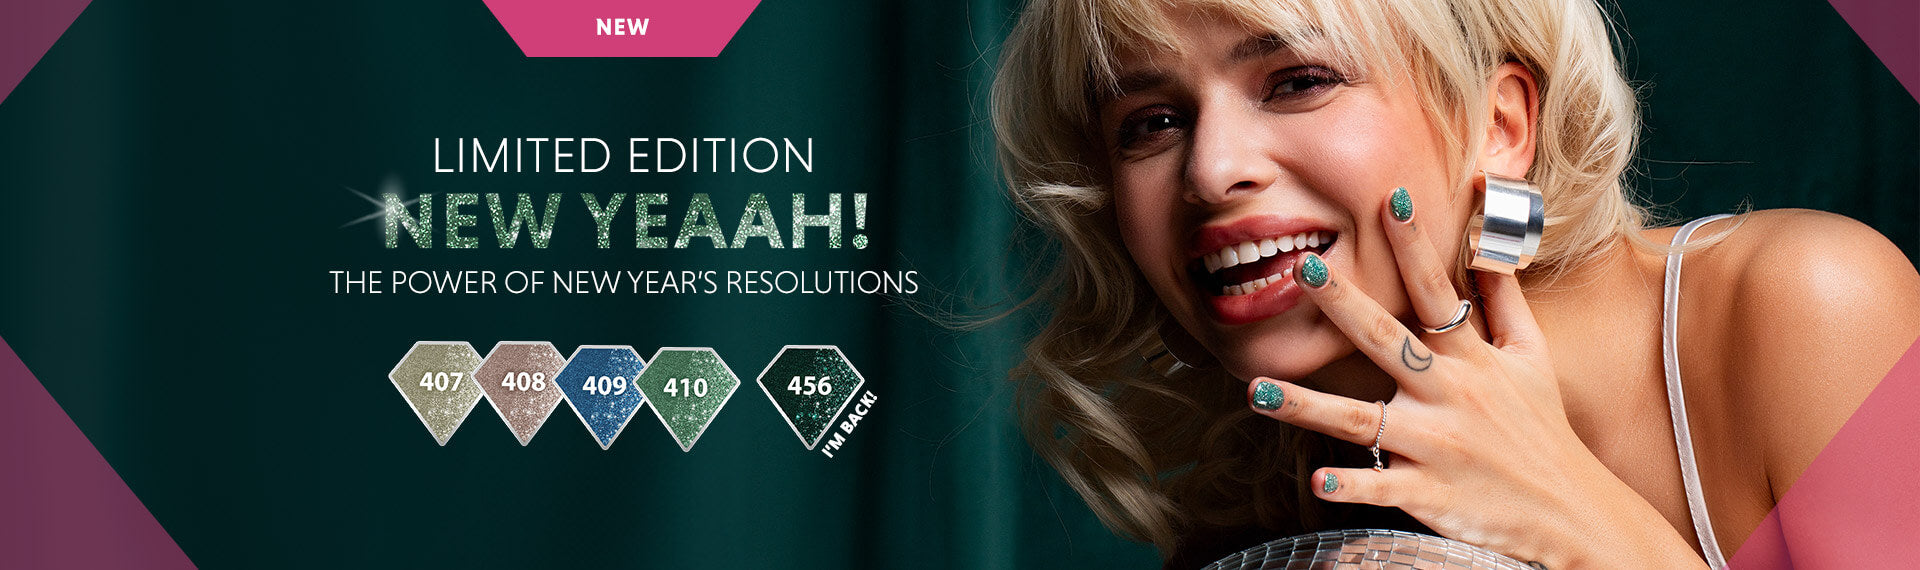 NEW YEAAH! THE POWER OF NEW YEAR'S RESOLUTIONS